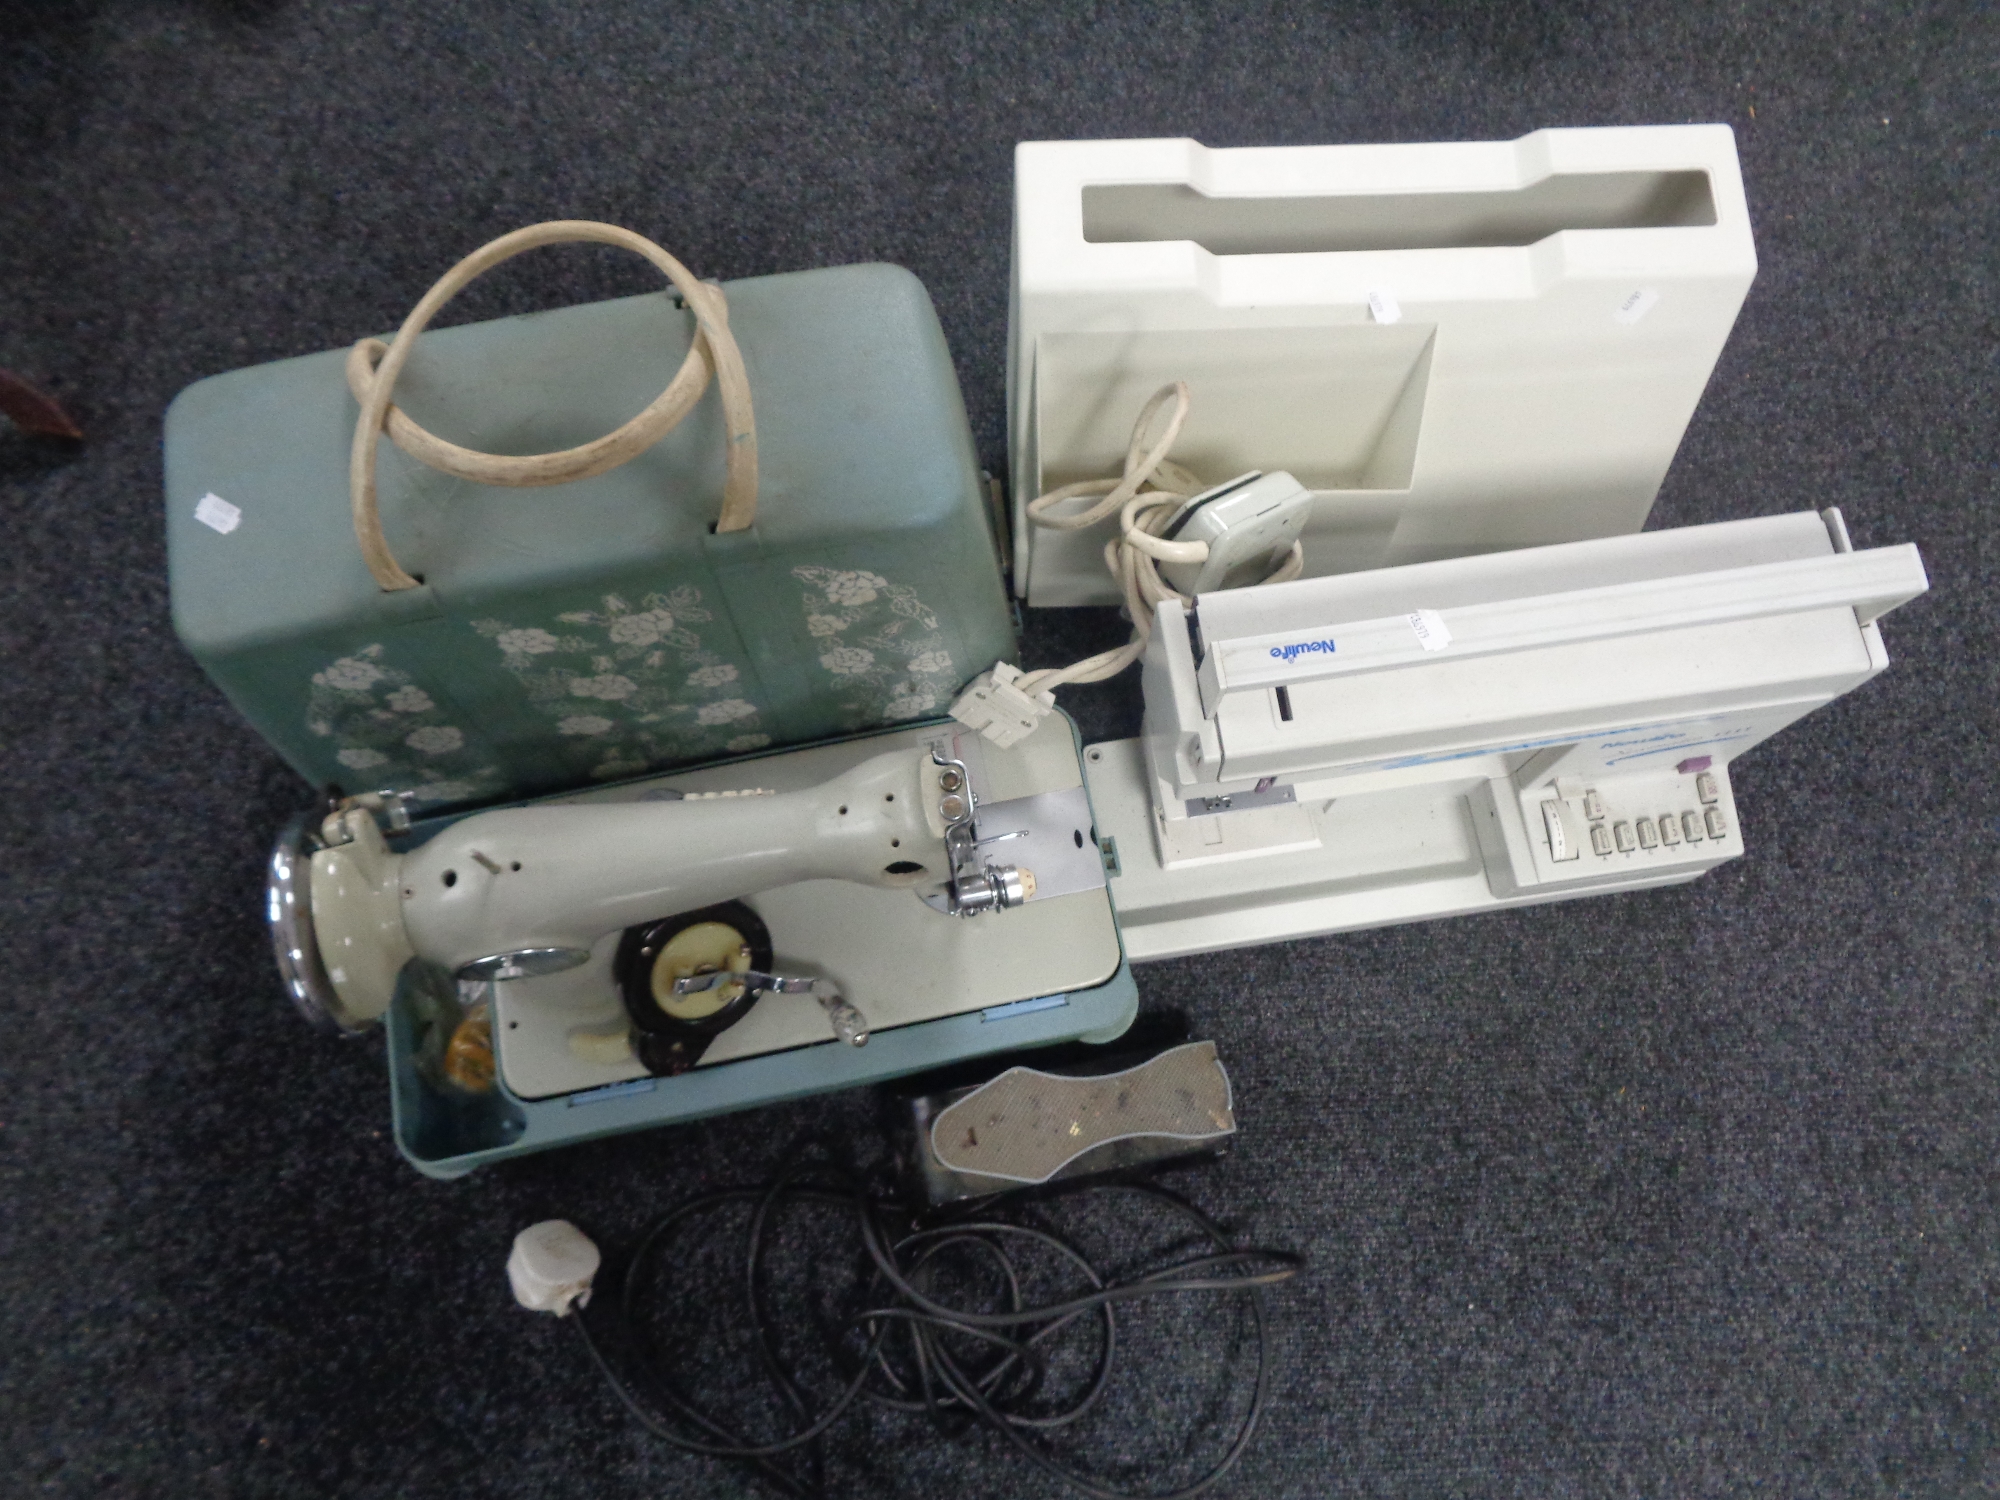 A cased new life Sewmatic 1111 electric sewing machine with foot pedal in case together with a